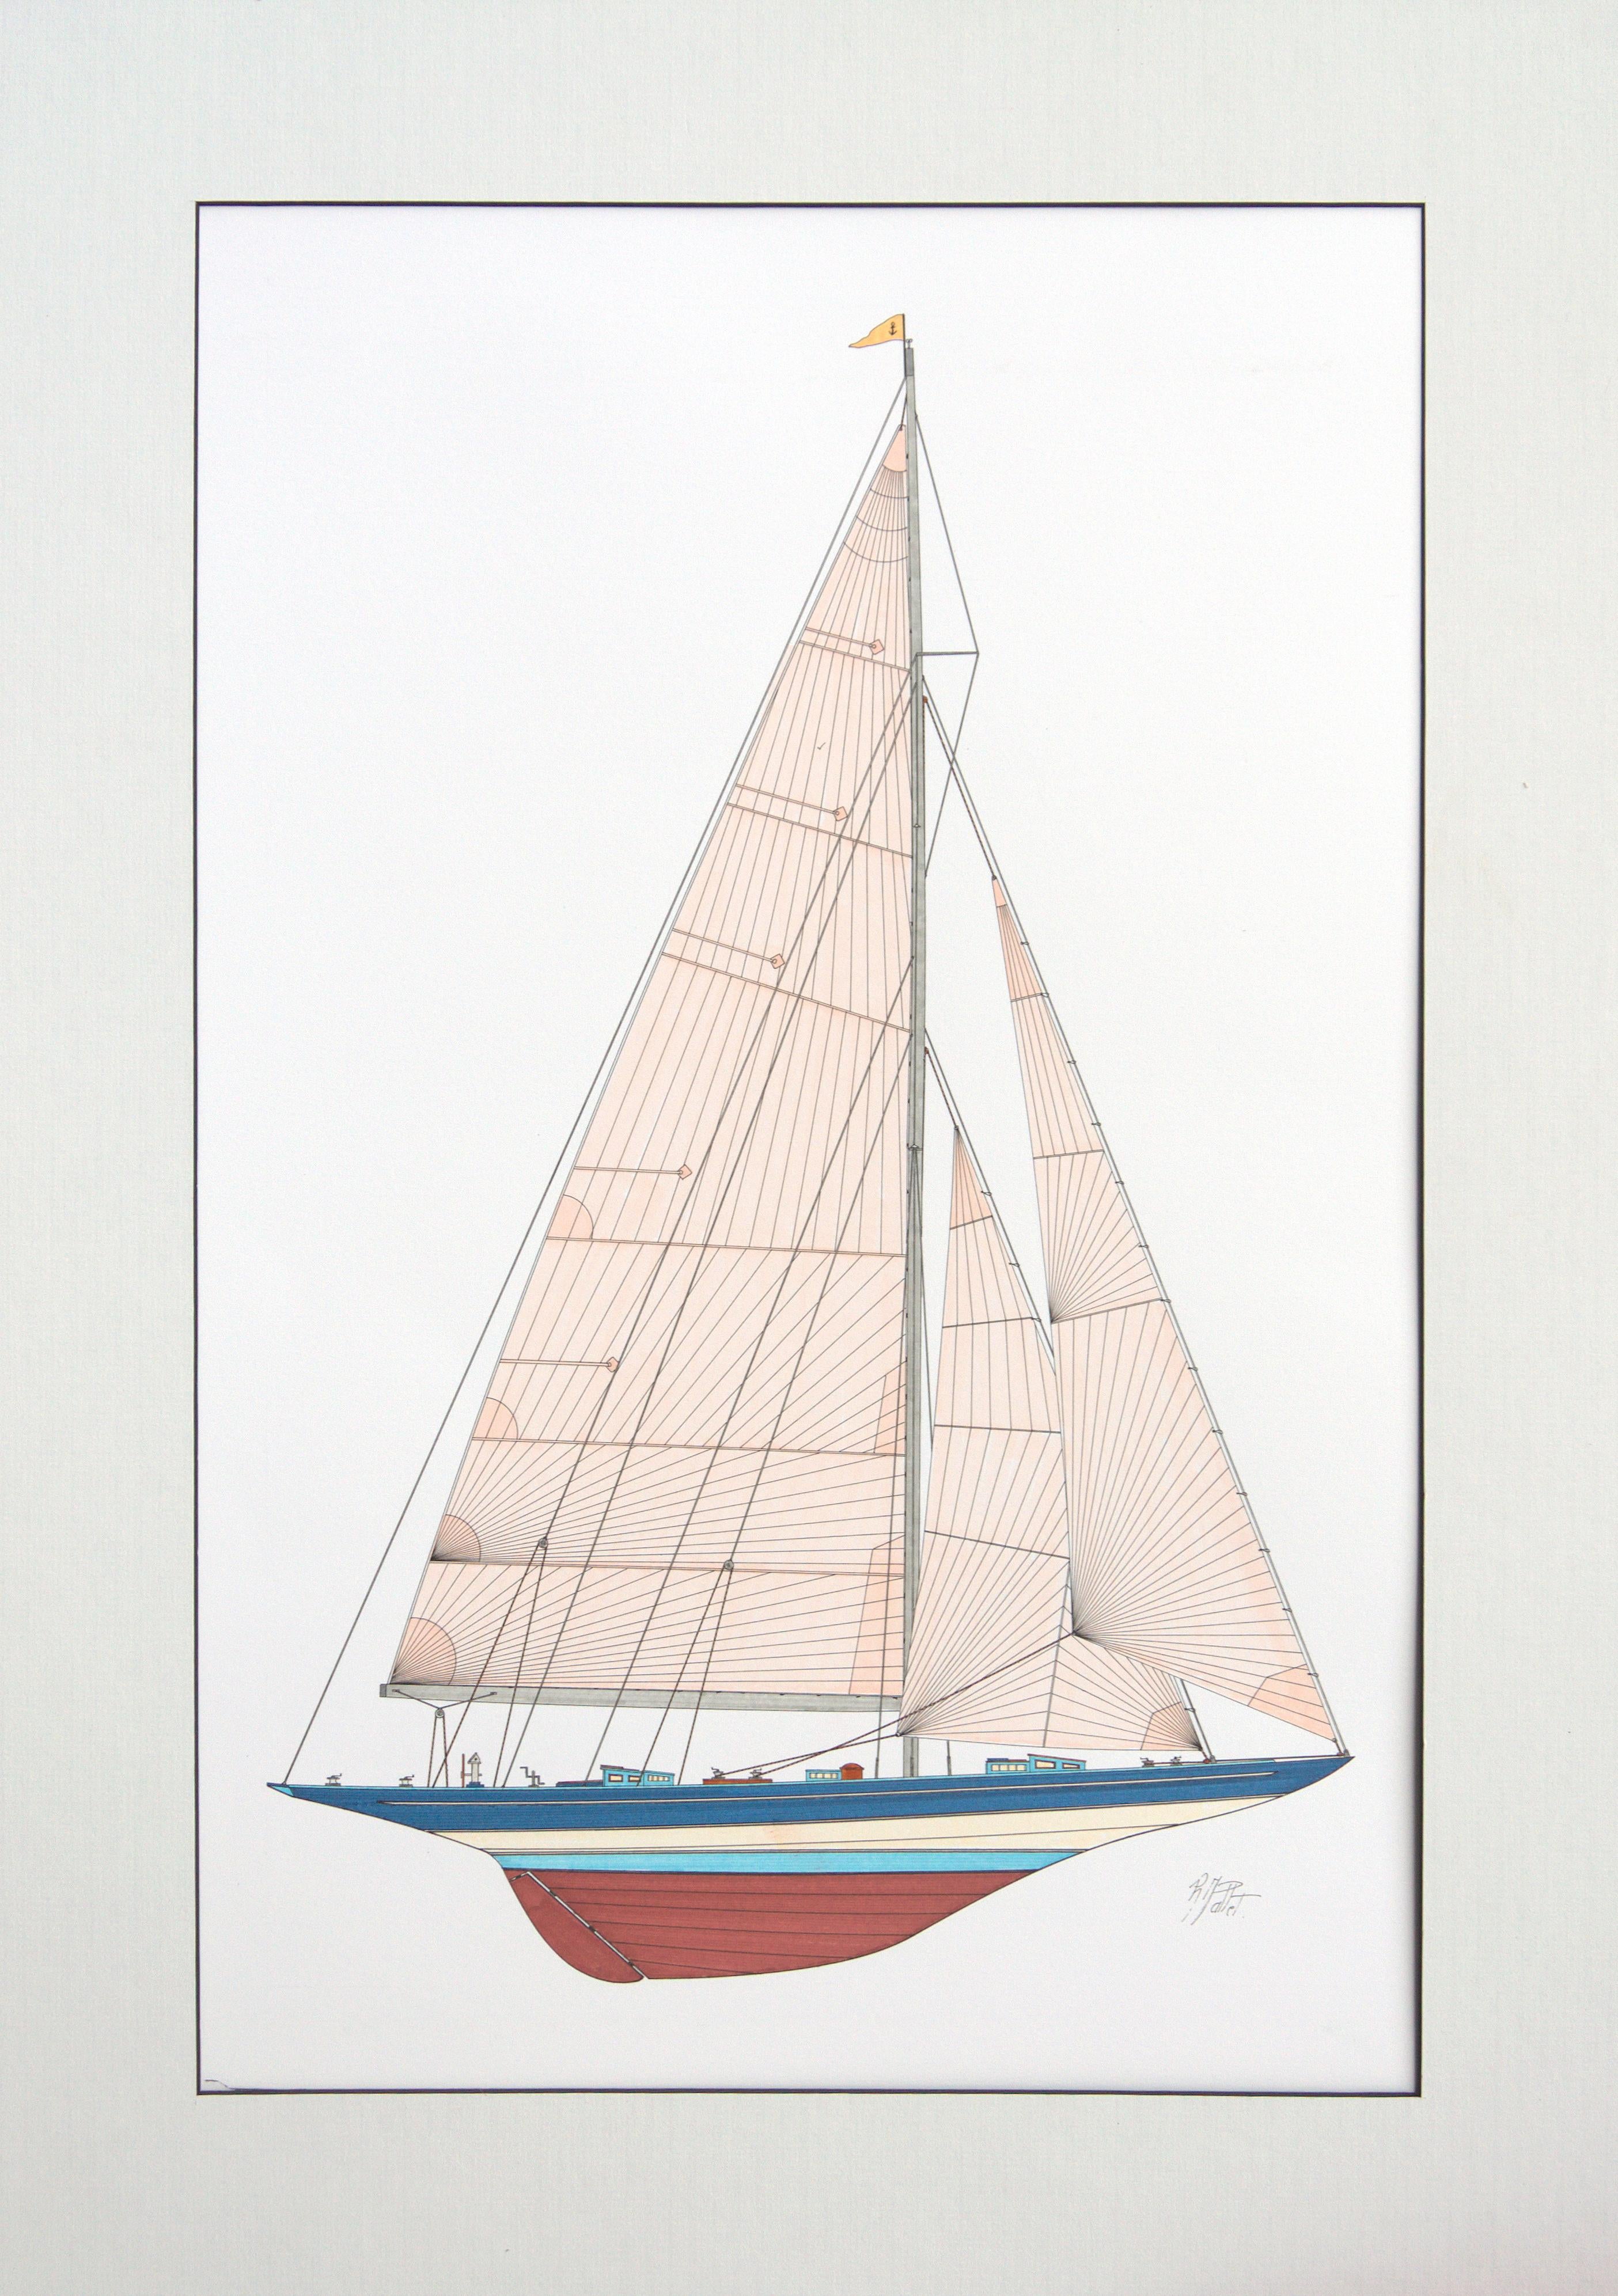 "Ranger", 1937 America's Cup Winner J-Class Racing Yacht Sailboat Ink on Paper